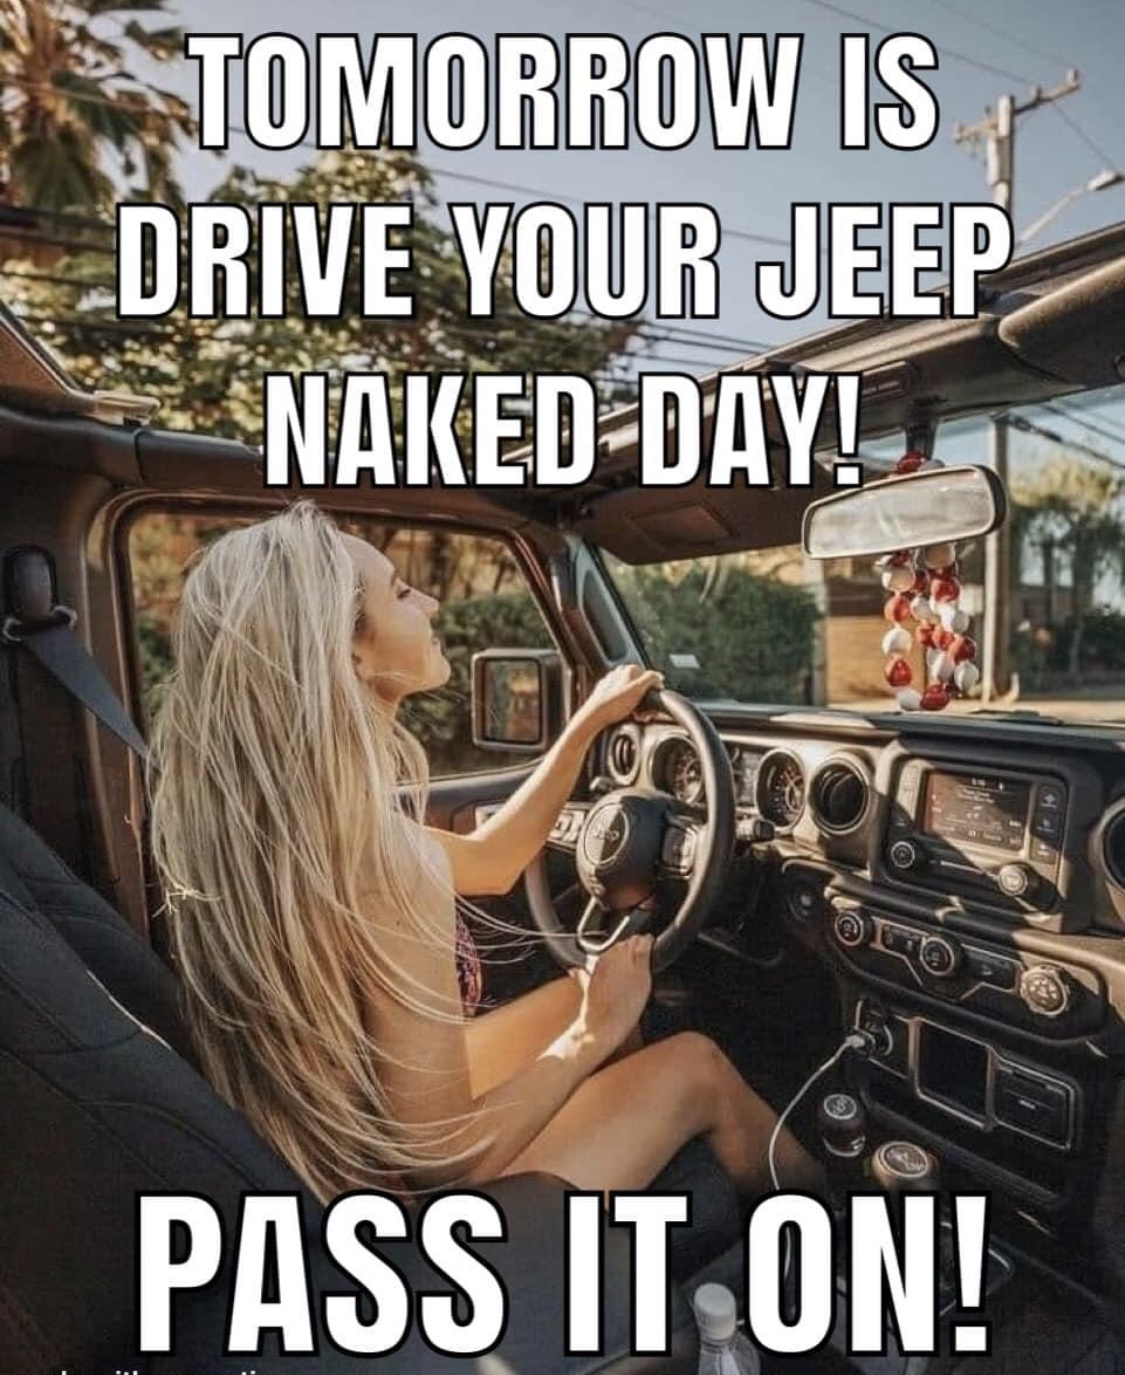 Drive your jeep.naked day